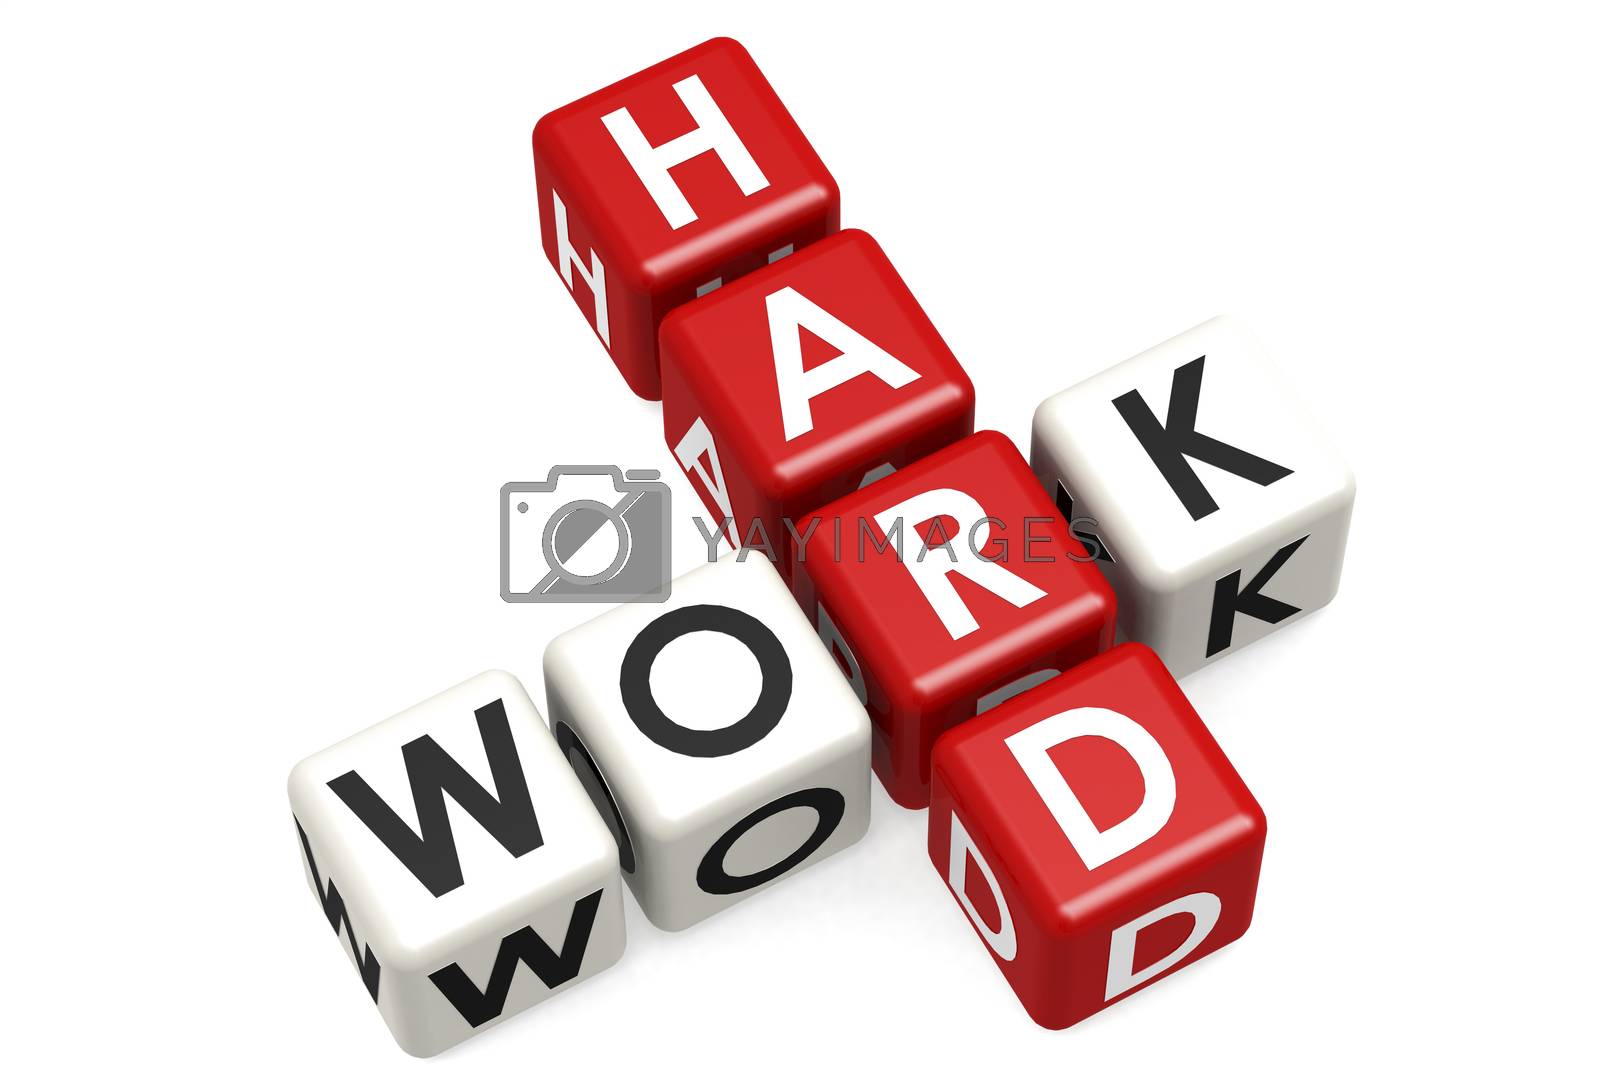 Royalty free image of Work hard cube crossword on white background by tang90246